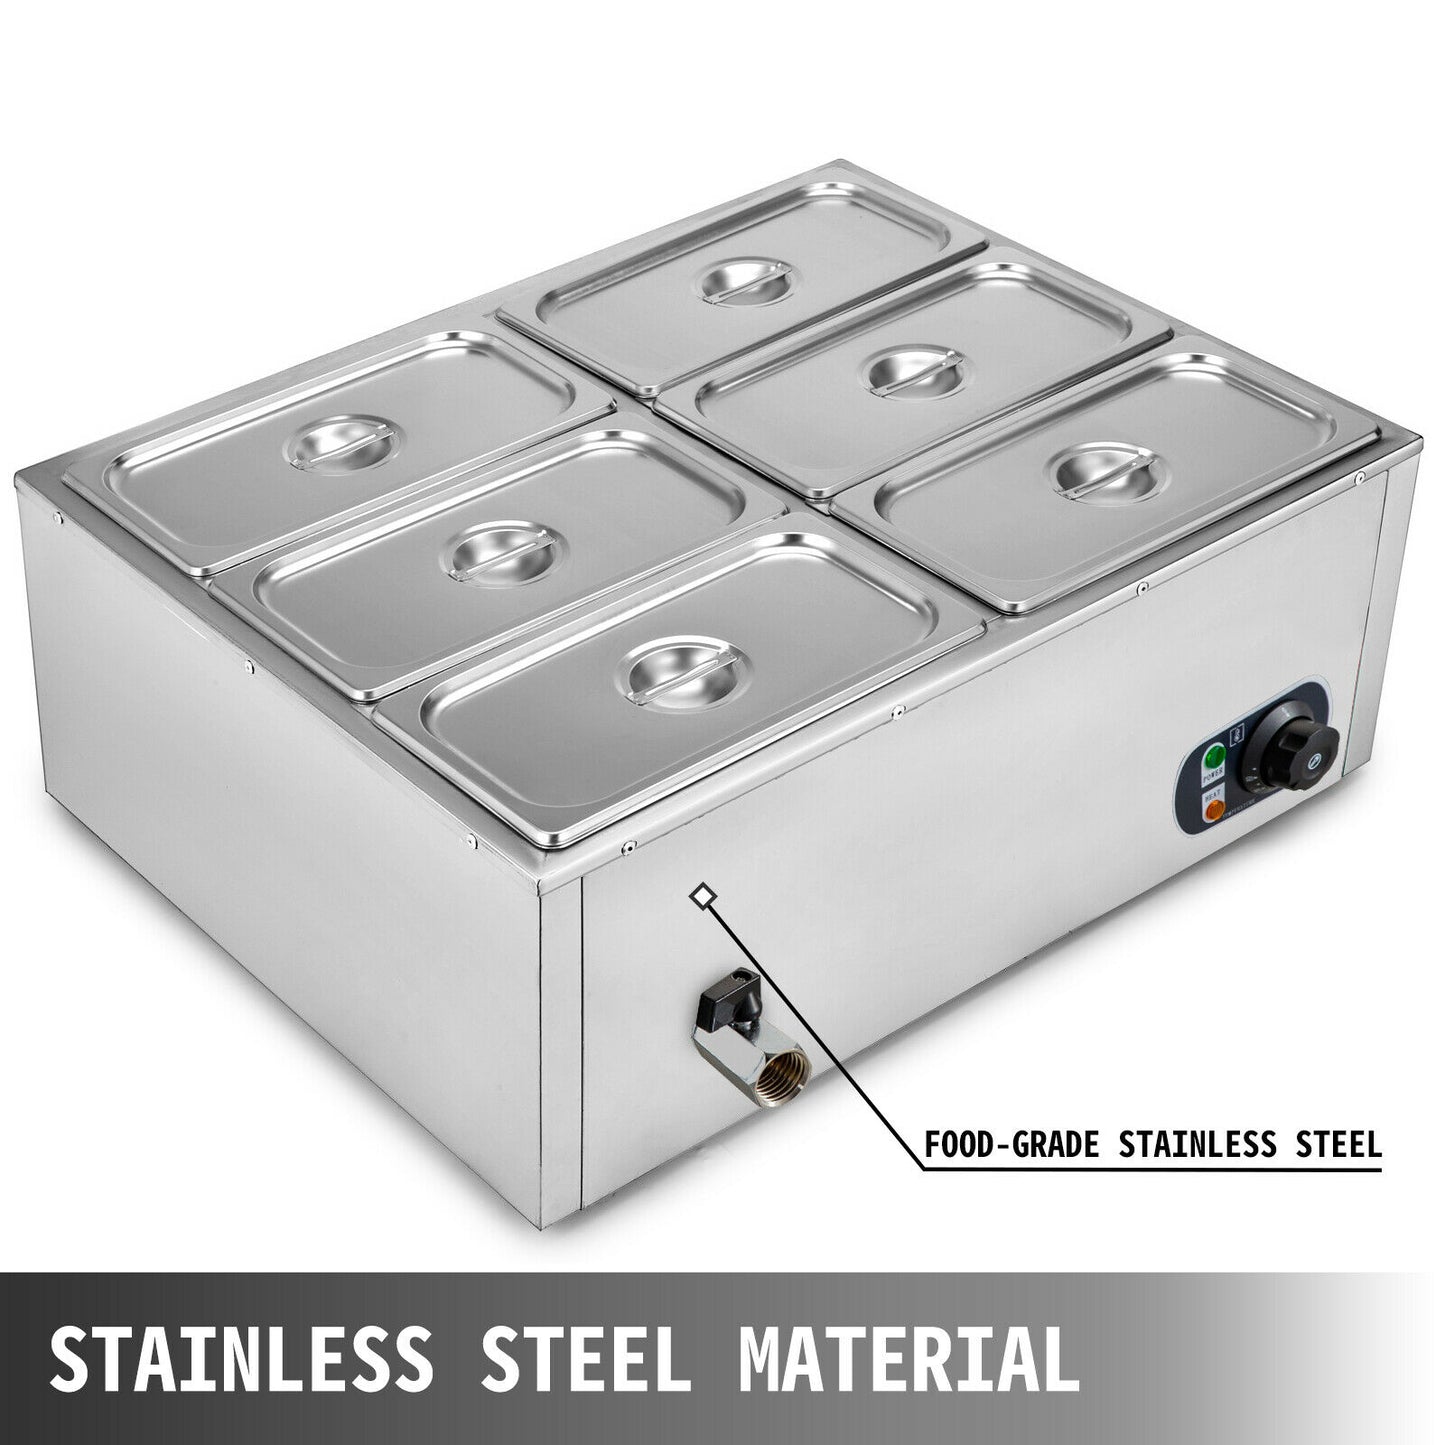 VEVOR 2 3 4 6 Pan Electric Catering Food Warmer Steam Table Stainless Steel Adjustable Temperature Buffet Restaurant Commercial - youronestopstore23